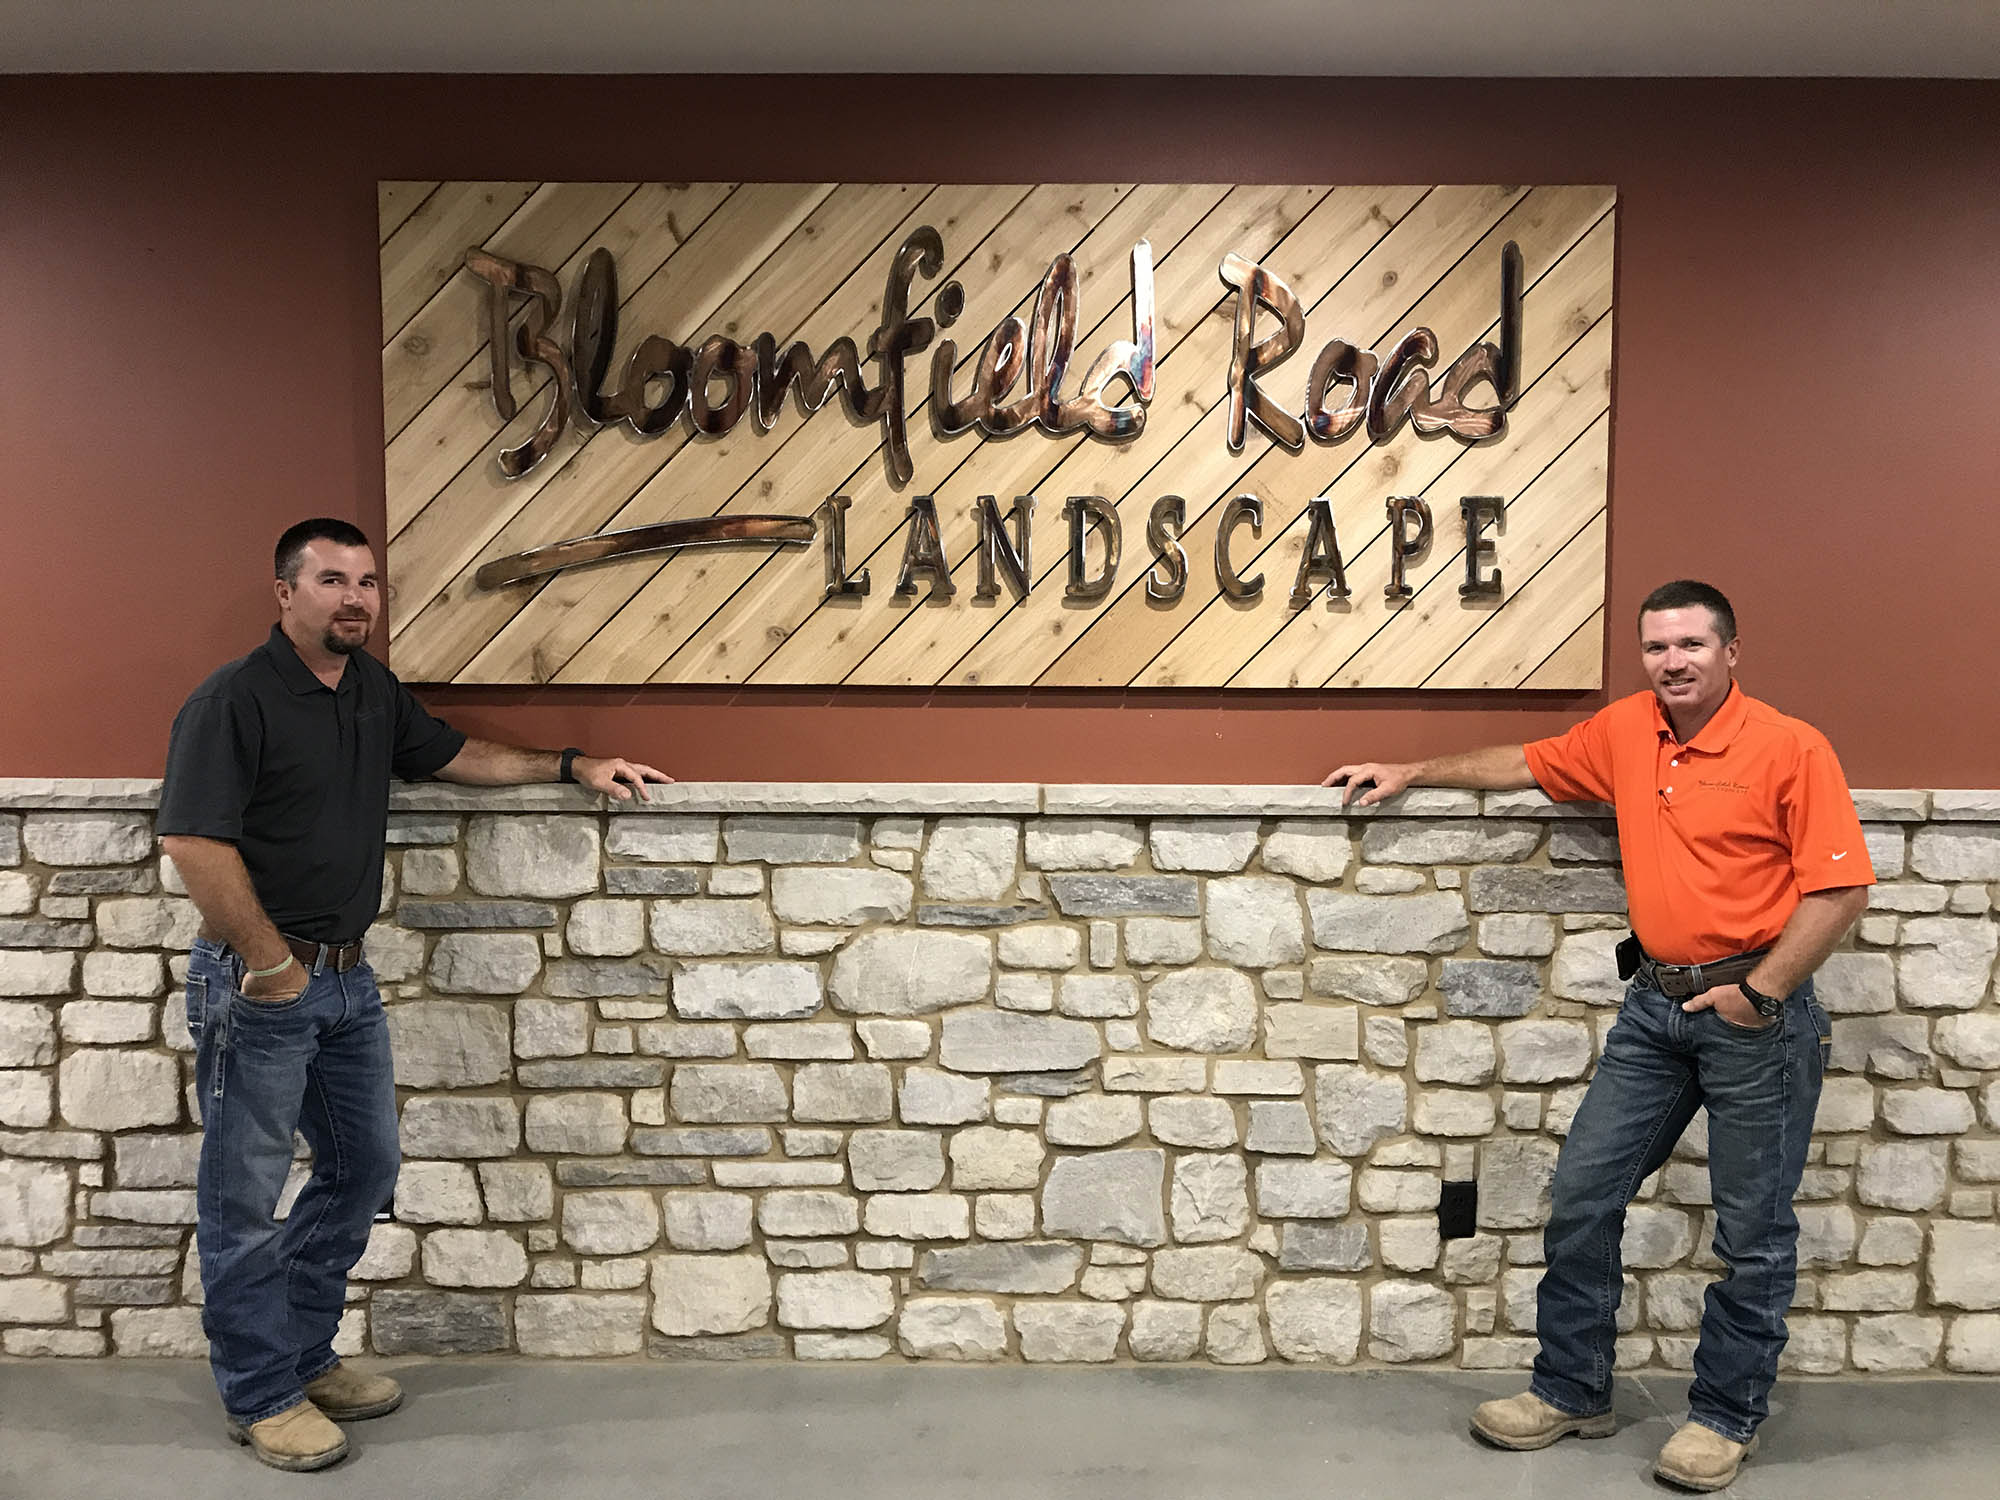 Travis and Bryan Burger Owner of Bloomfield Road Landscape in Scott City, MO